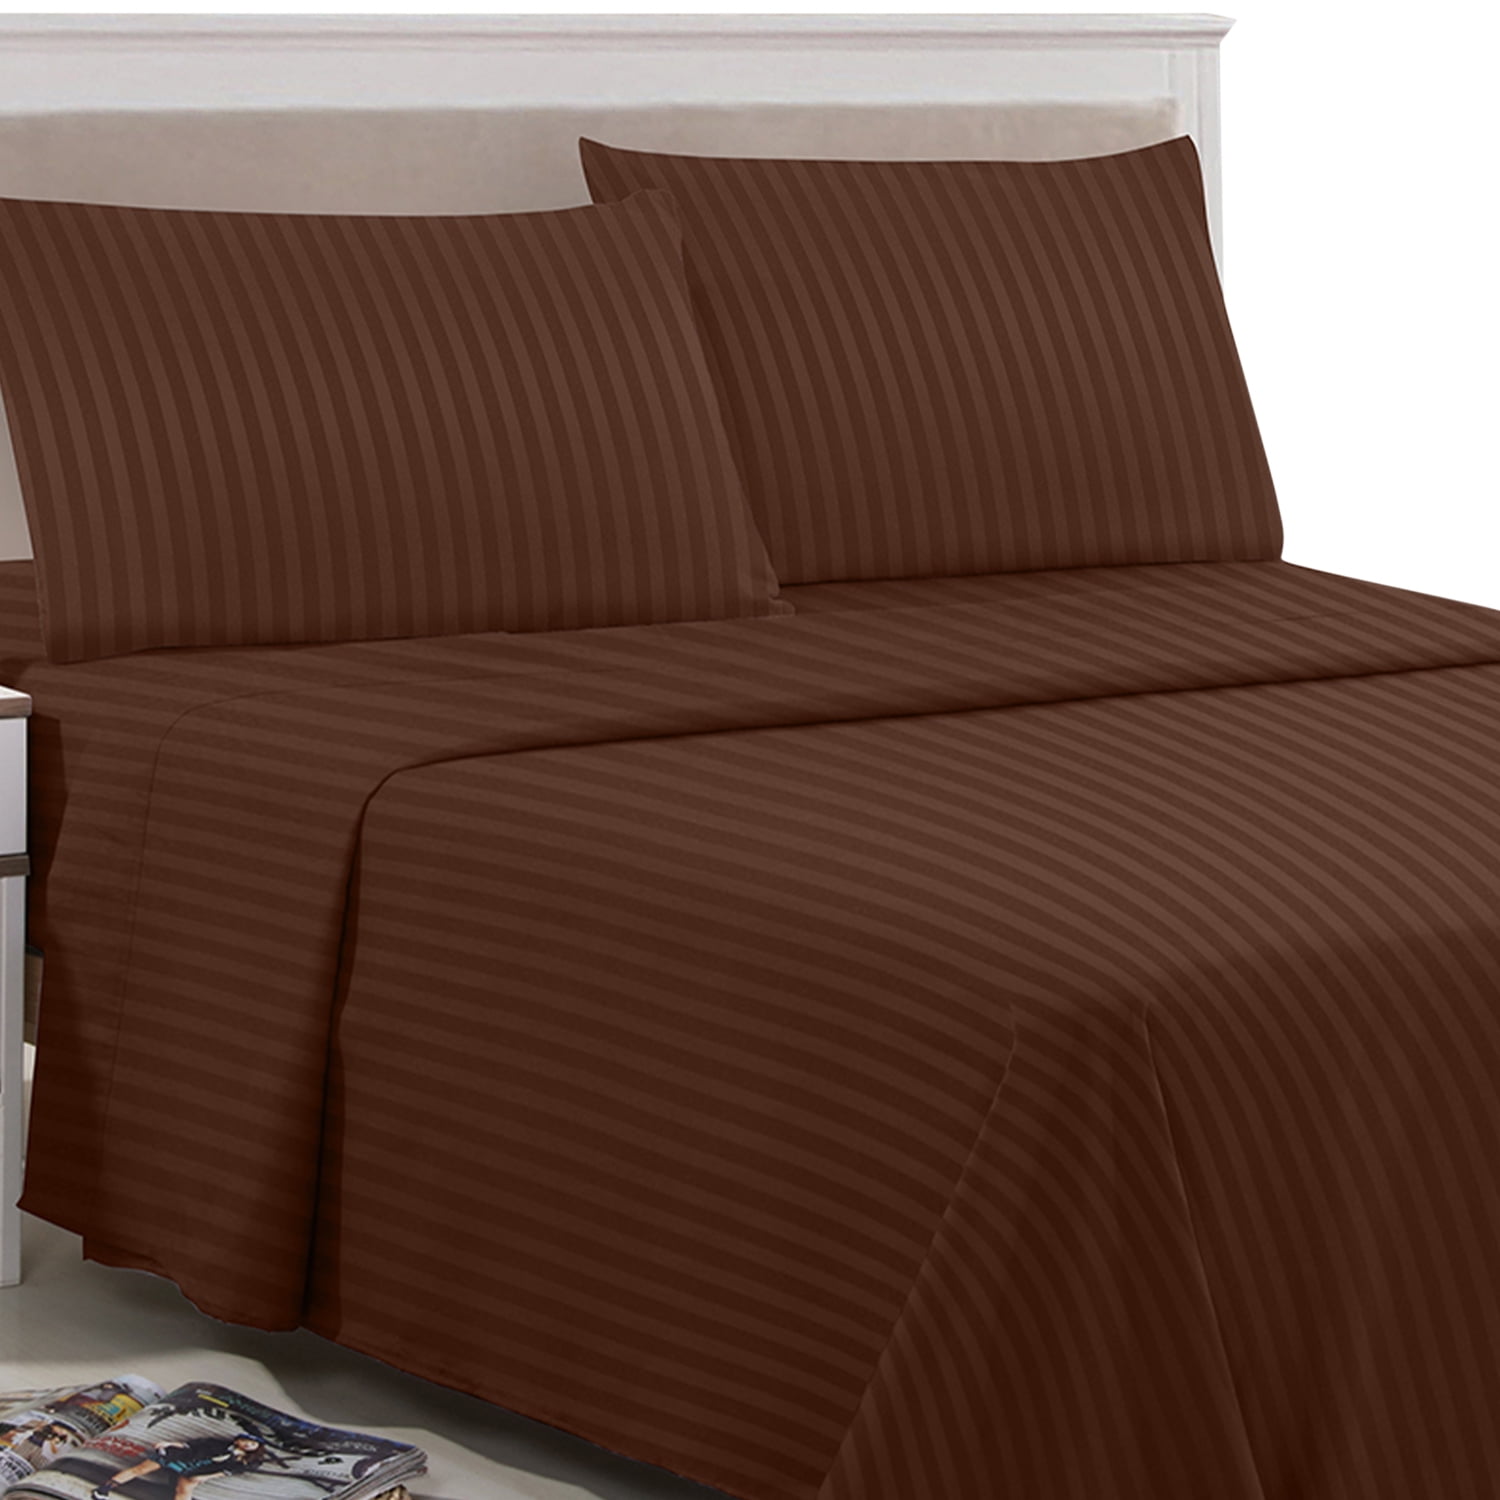 Details about   Tremendous Bedding Collection Deep Pocket Egyptian Cotton Full XL Size All Strip 